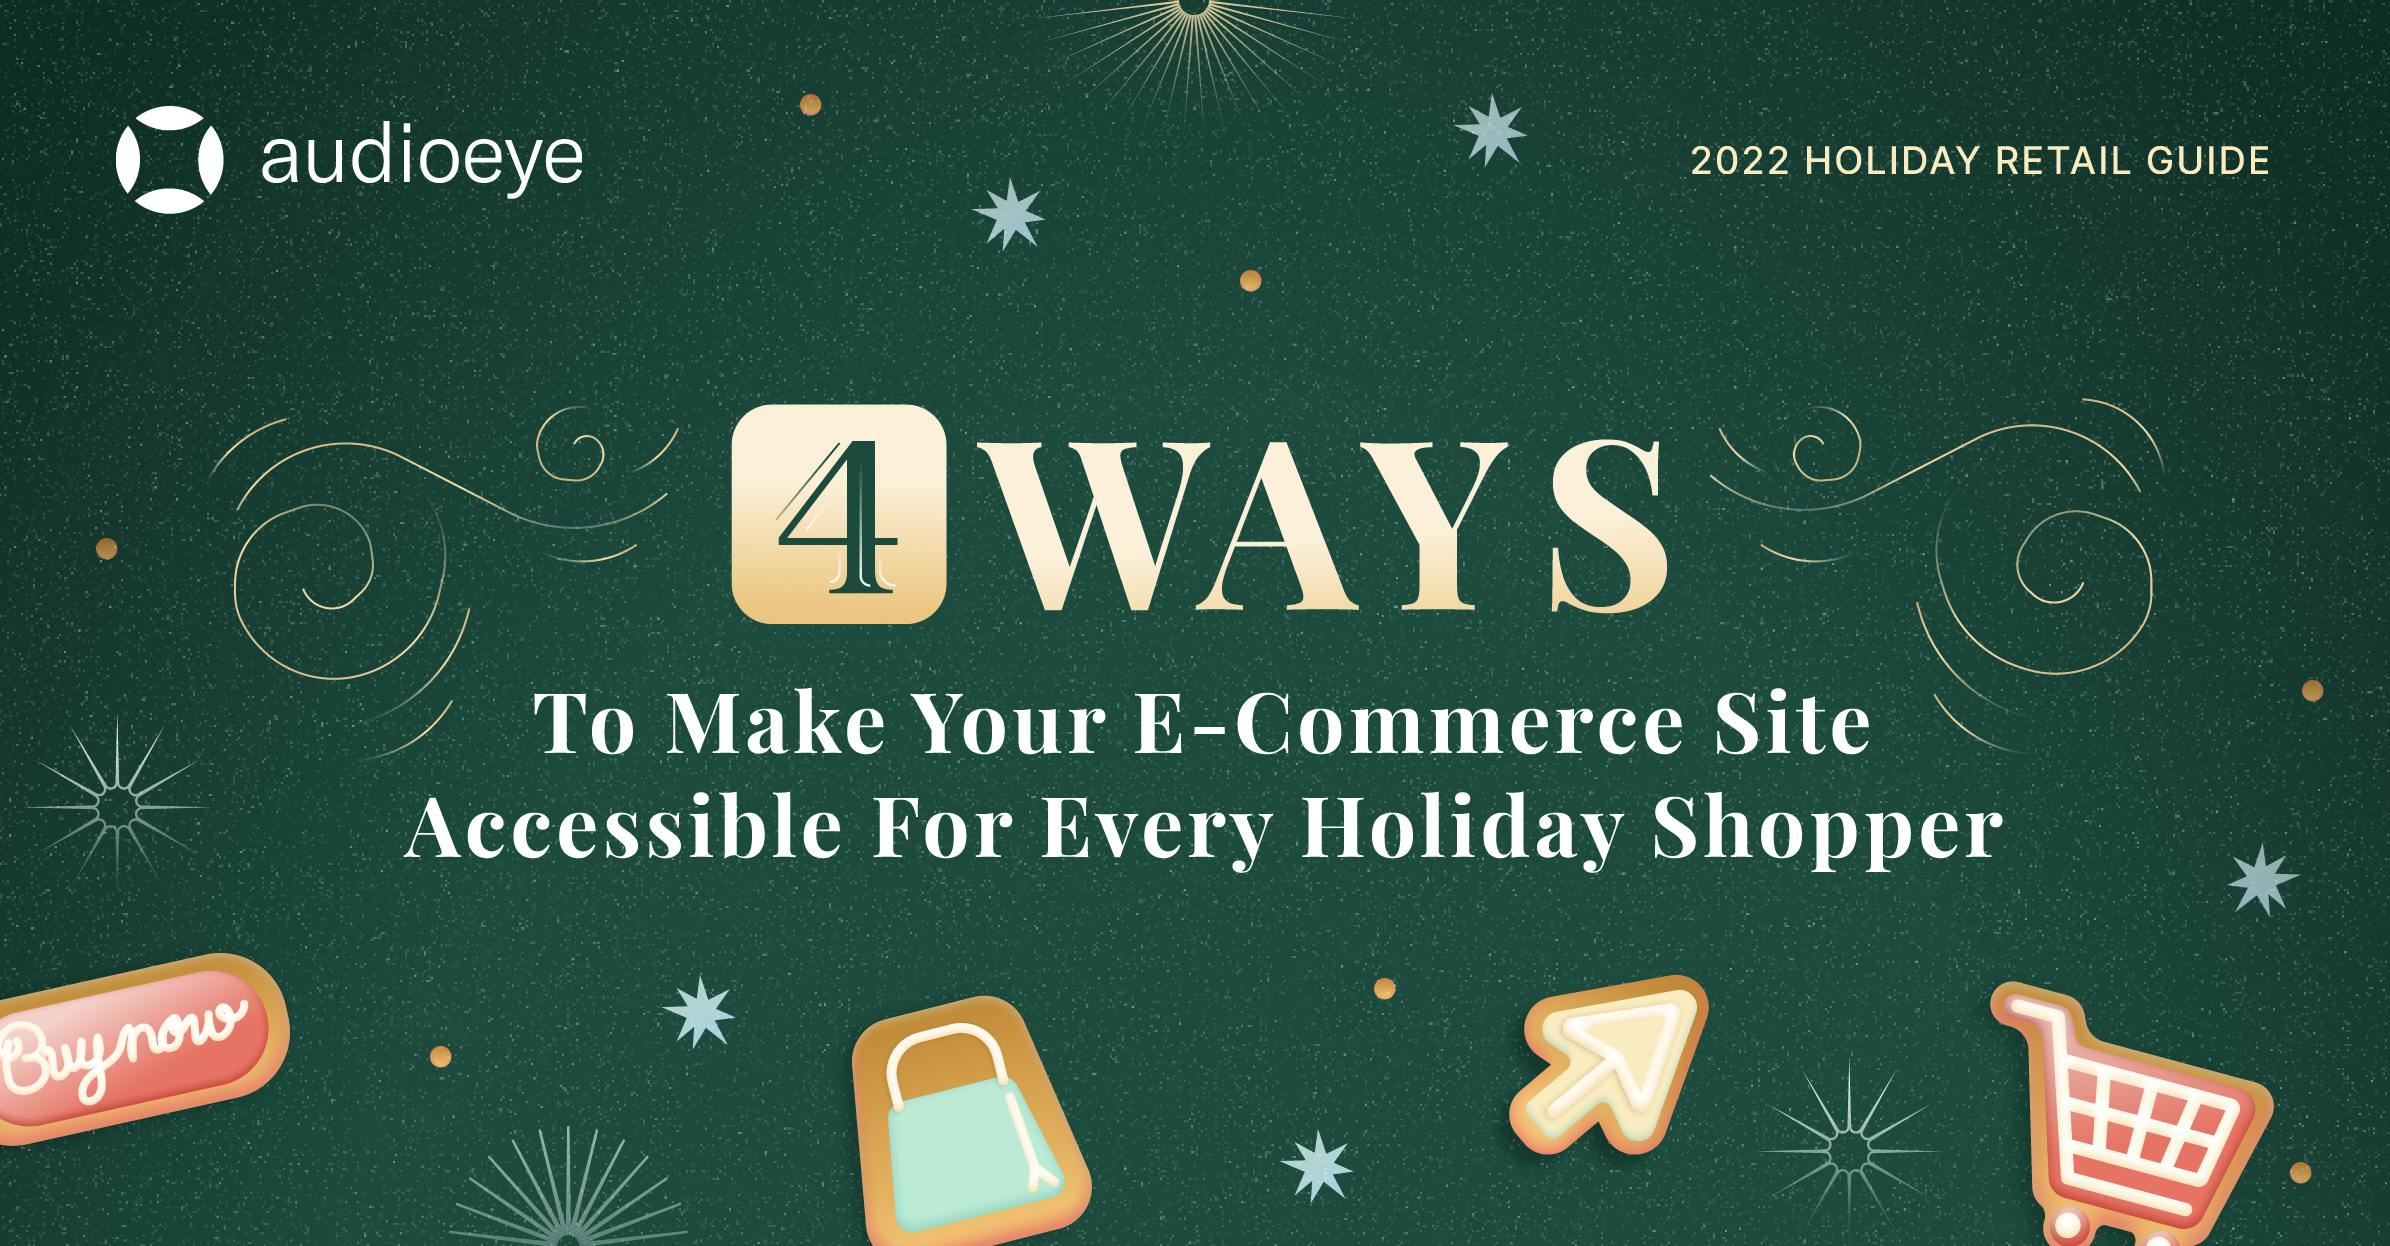 A series of gingerbread cookies decorated in the shape of a shopping cart, a cursor, and a buy now button, beneath a label that reads "4 Ways To Make Your E-Commerce Site Accessible for Every Holiday Shopper".